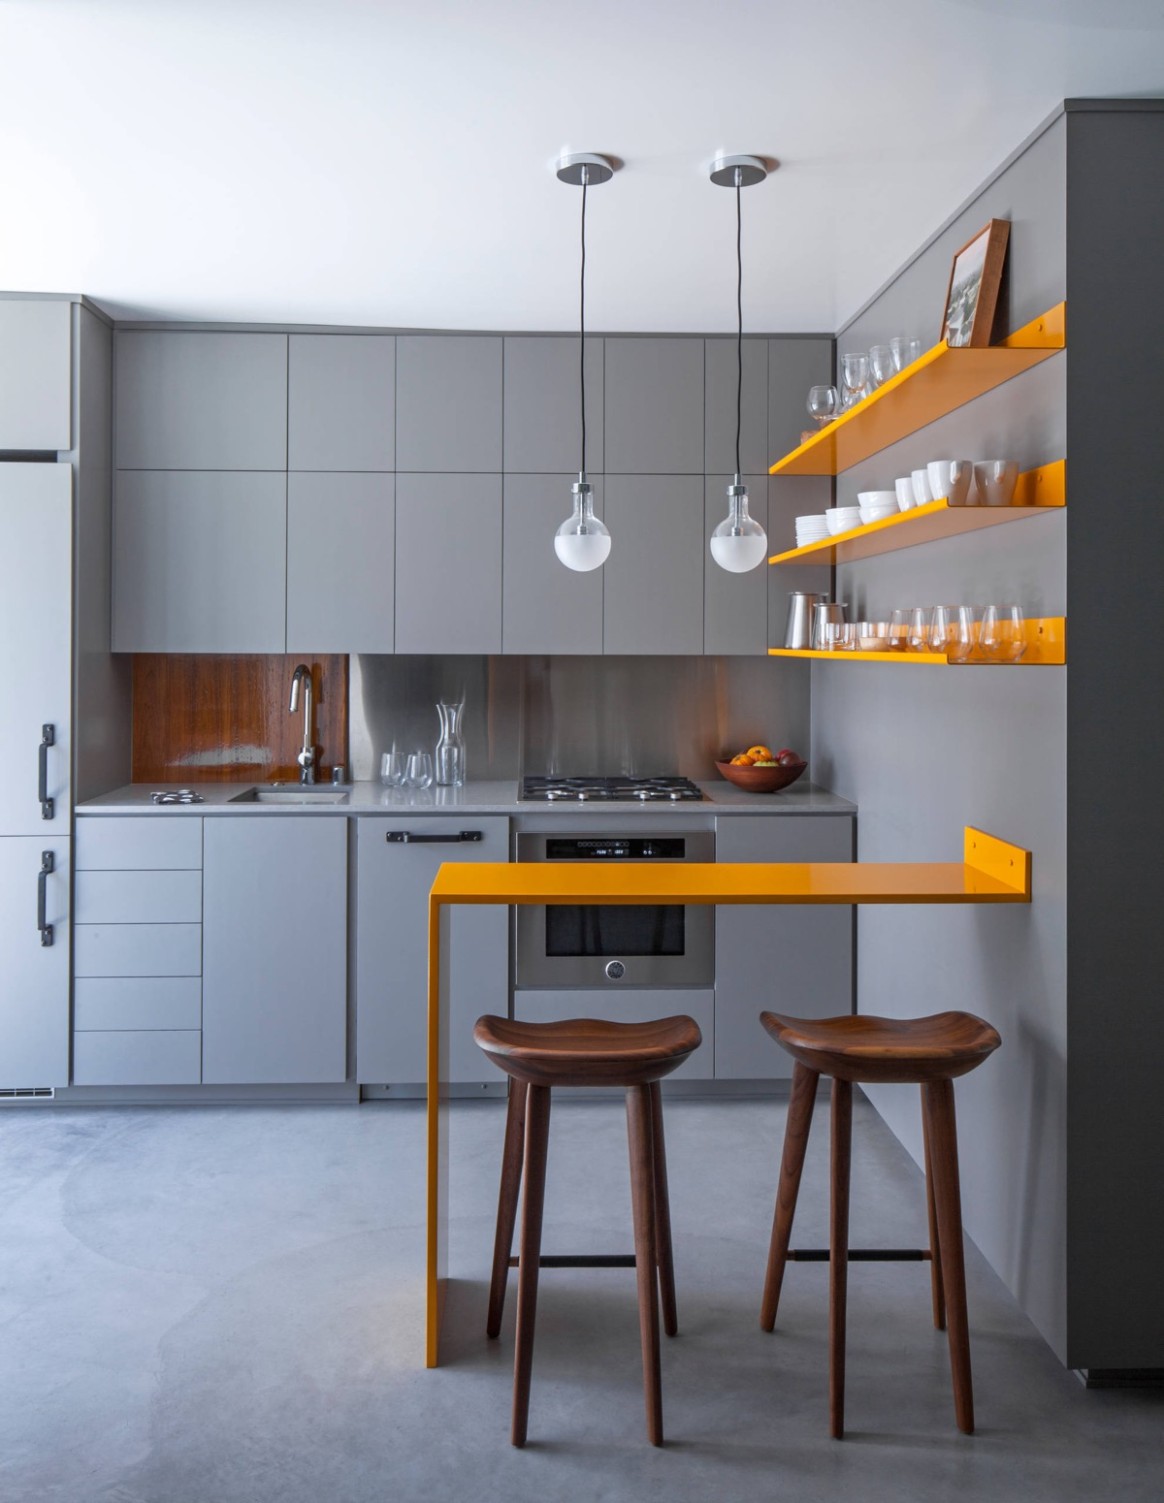 6 Splendid Small Kitchens And Ideas You Can Use From Them - modern kitchen design small spaces